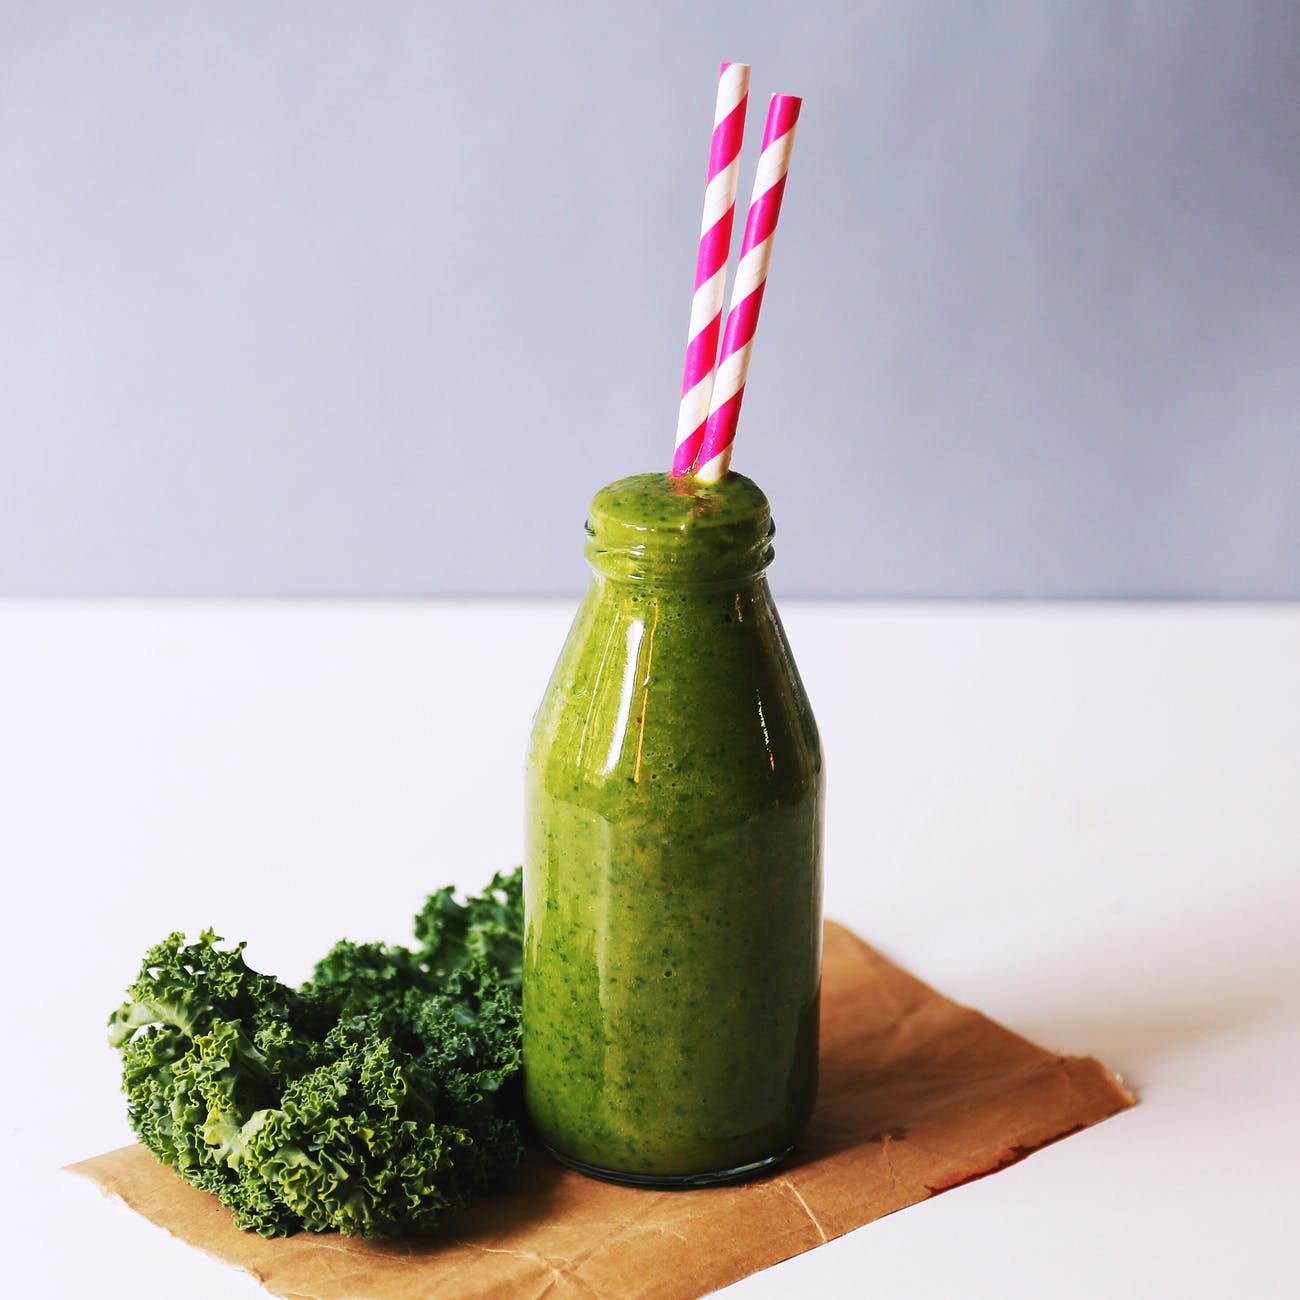 Photo by Alisha Mishra on&nbsp;<a rel="nofollow" href="https://www.pexels.com/photo/clear-glass-bottle-filled-with-broccoli-shake-1346347/">Pexels.com</a>